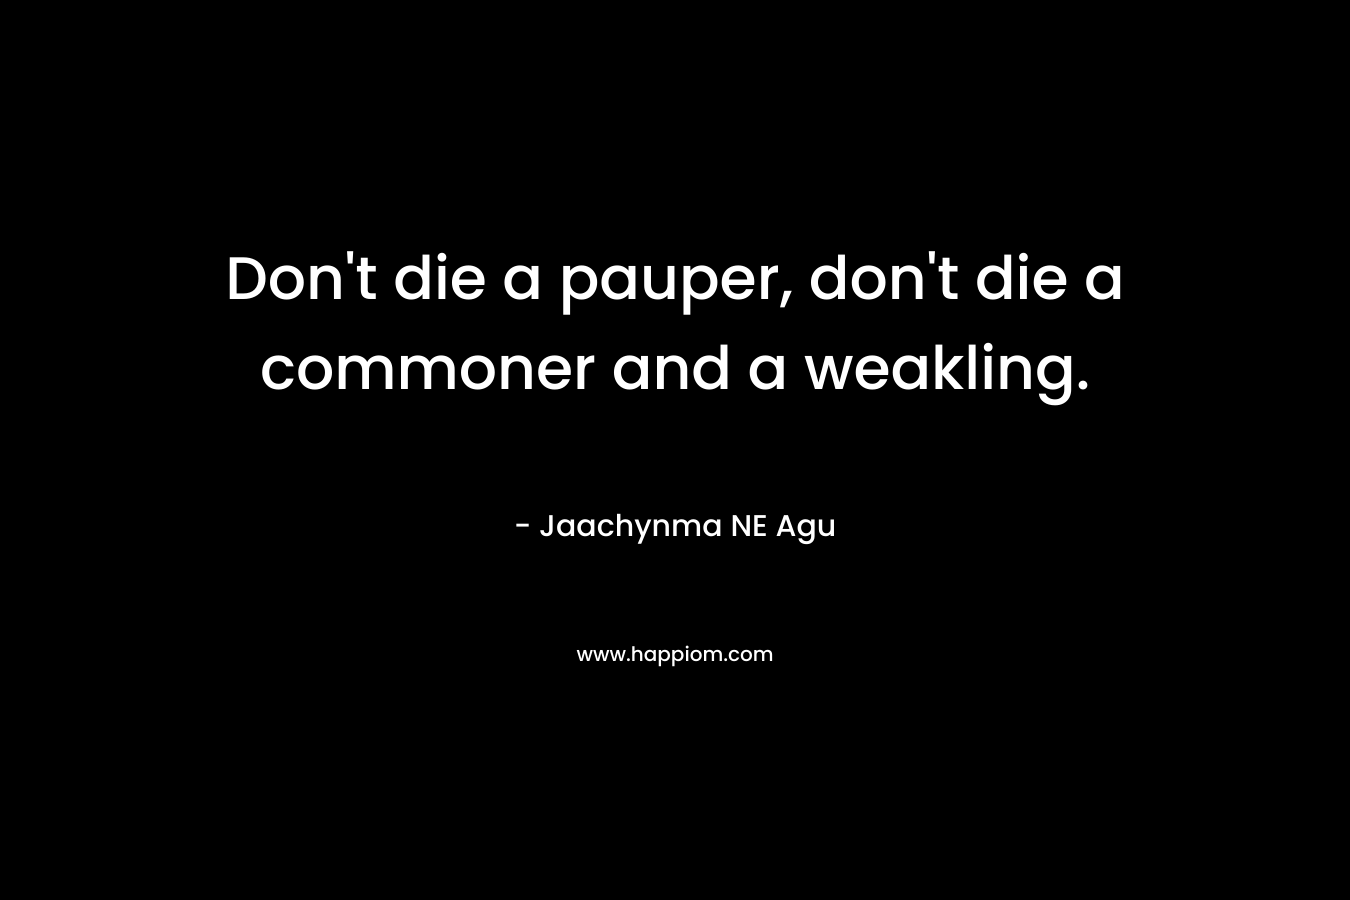 Don’t die a pauper, don’t die a commoner and a weakling. – Jaachynma NE Agu